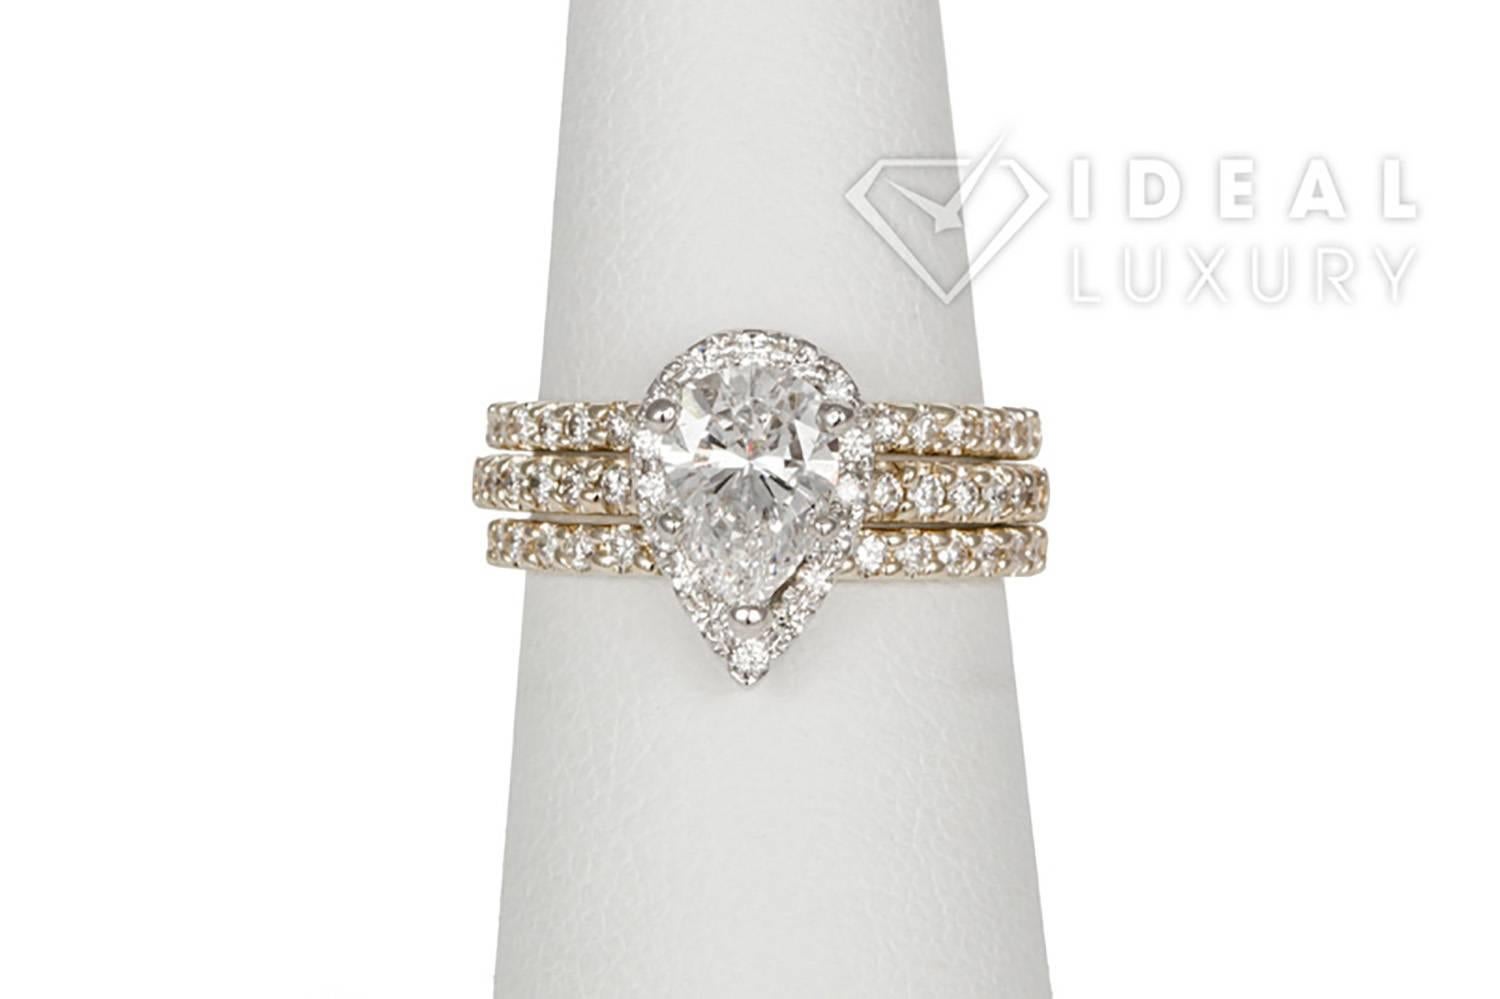 Ideal Luxury is pleased to present this Ladies EGL 14K Two Tone Yellow & White Gold Pear Diamond Halo Engagement Ring & Wedding Band Set. This beautiful wedding set features an EGL Certified 1.05ct D/SI2 Pear Cut Center Diamond accented by an